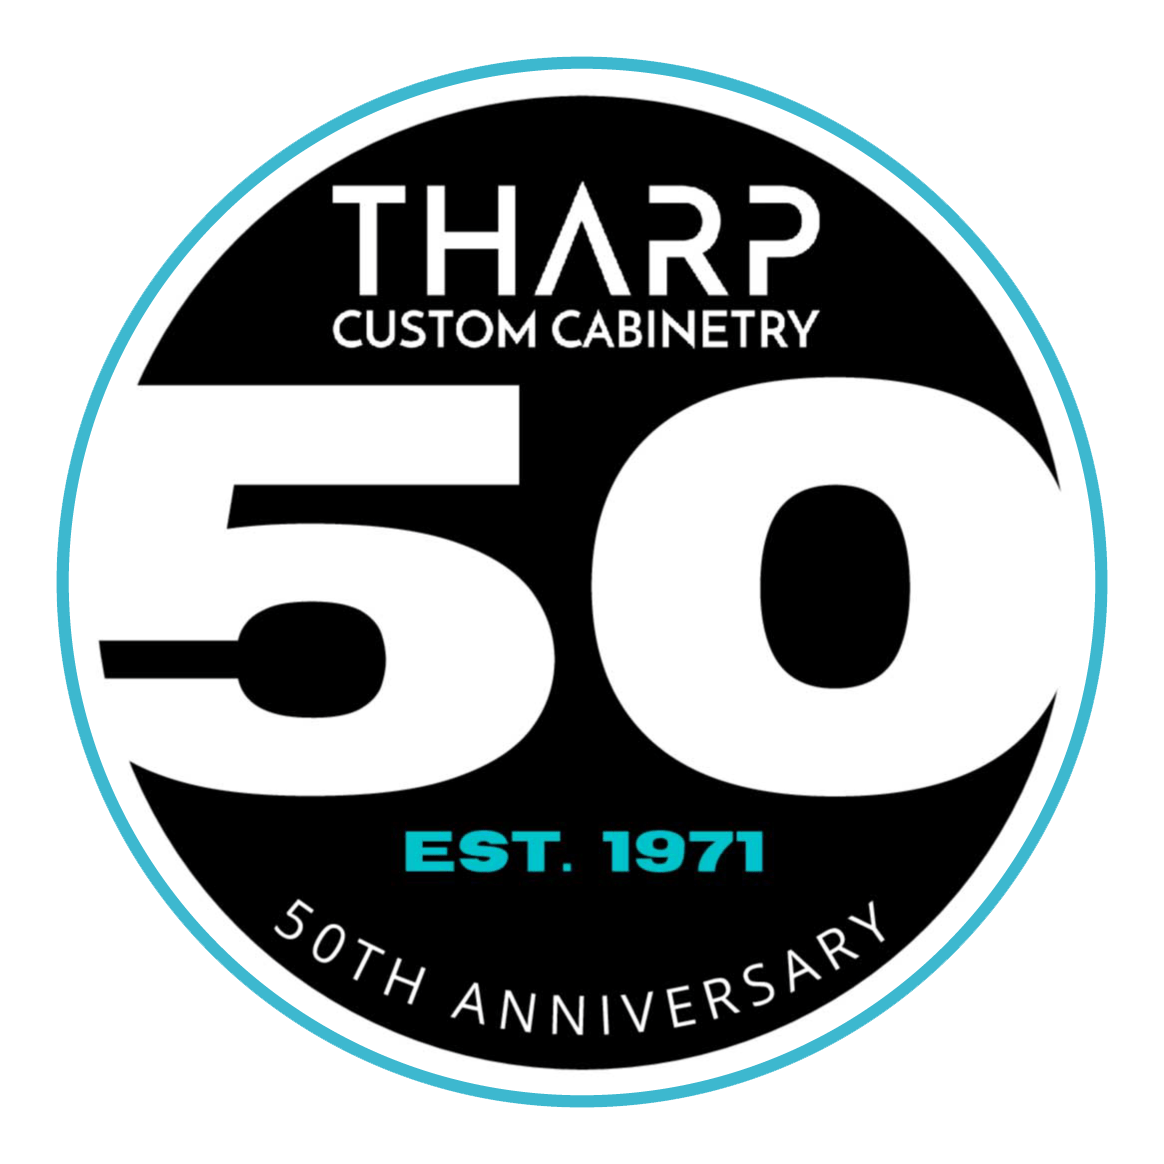 Tharp Custom Cabinetry Colorado S Best Cabinets For Over 50 Years